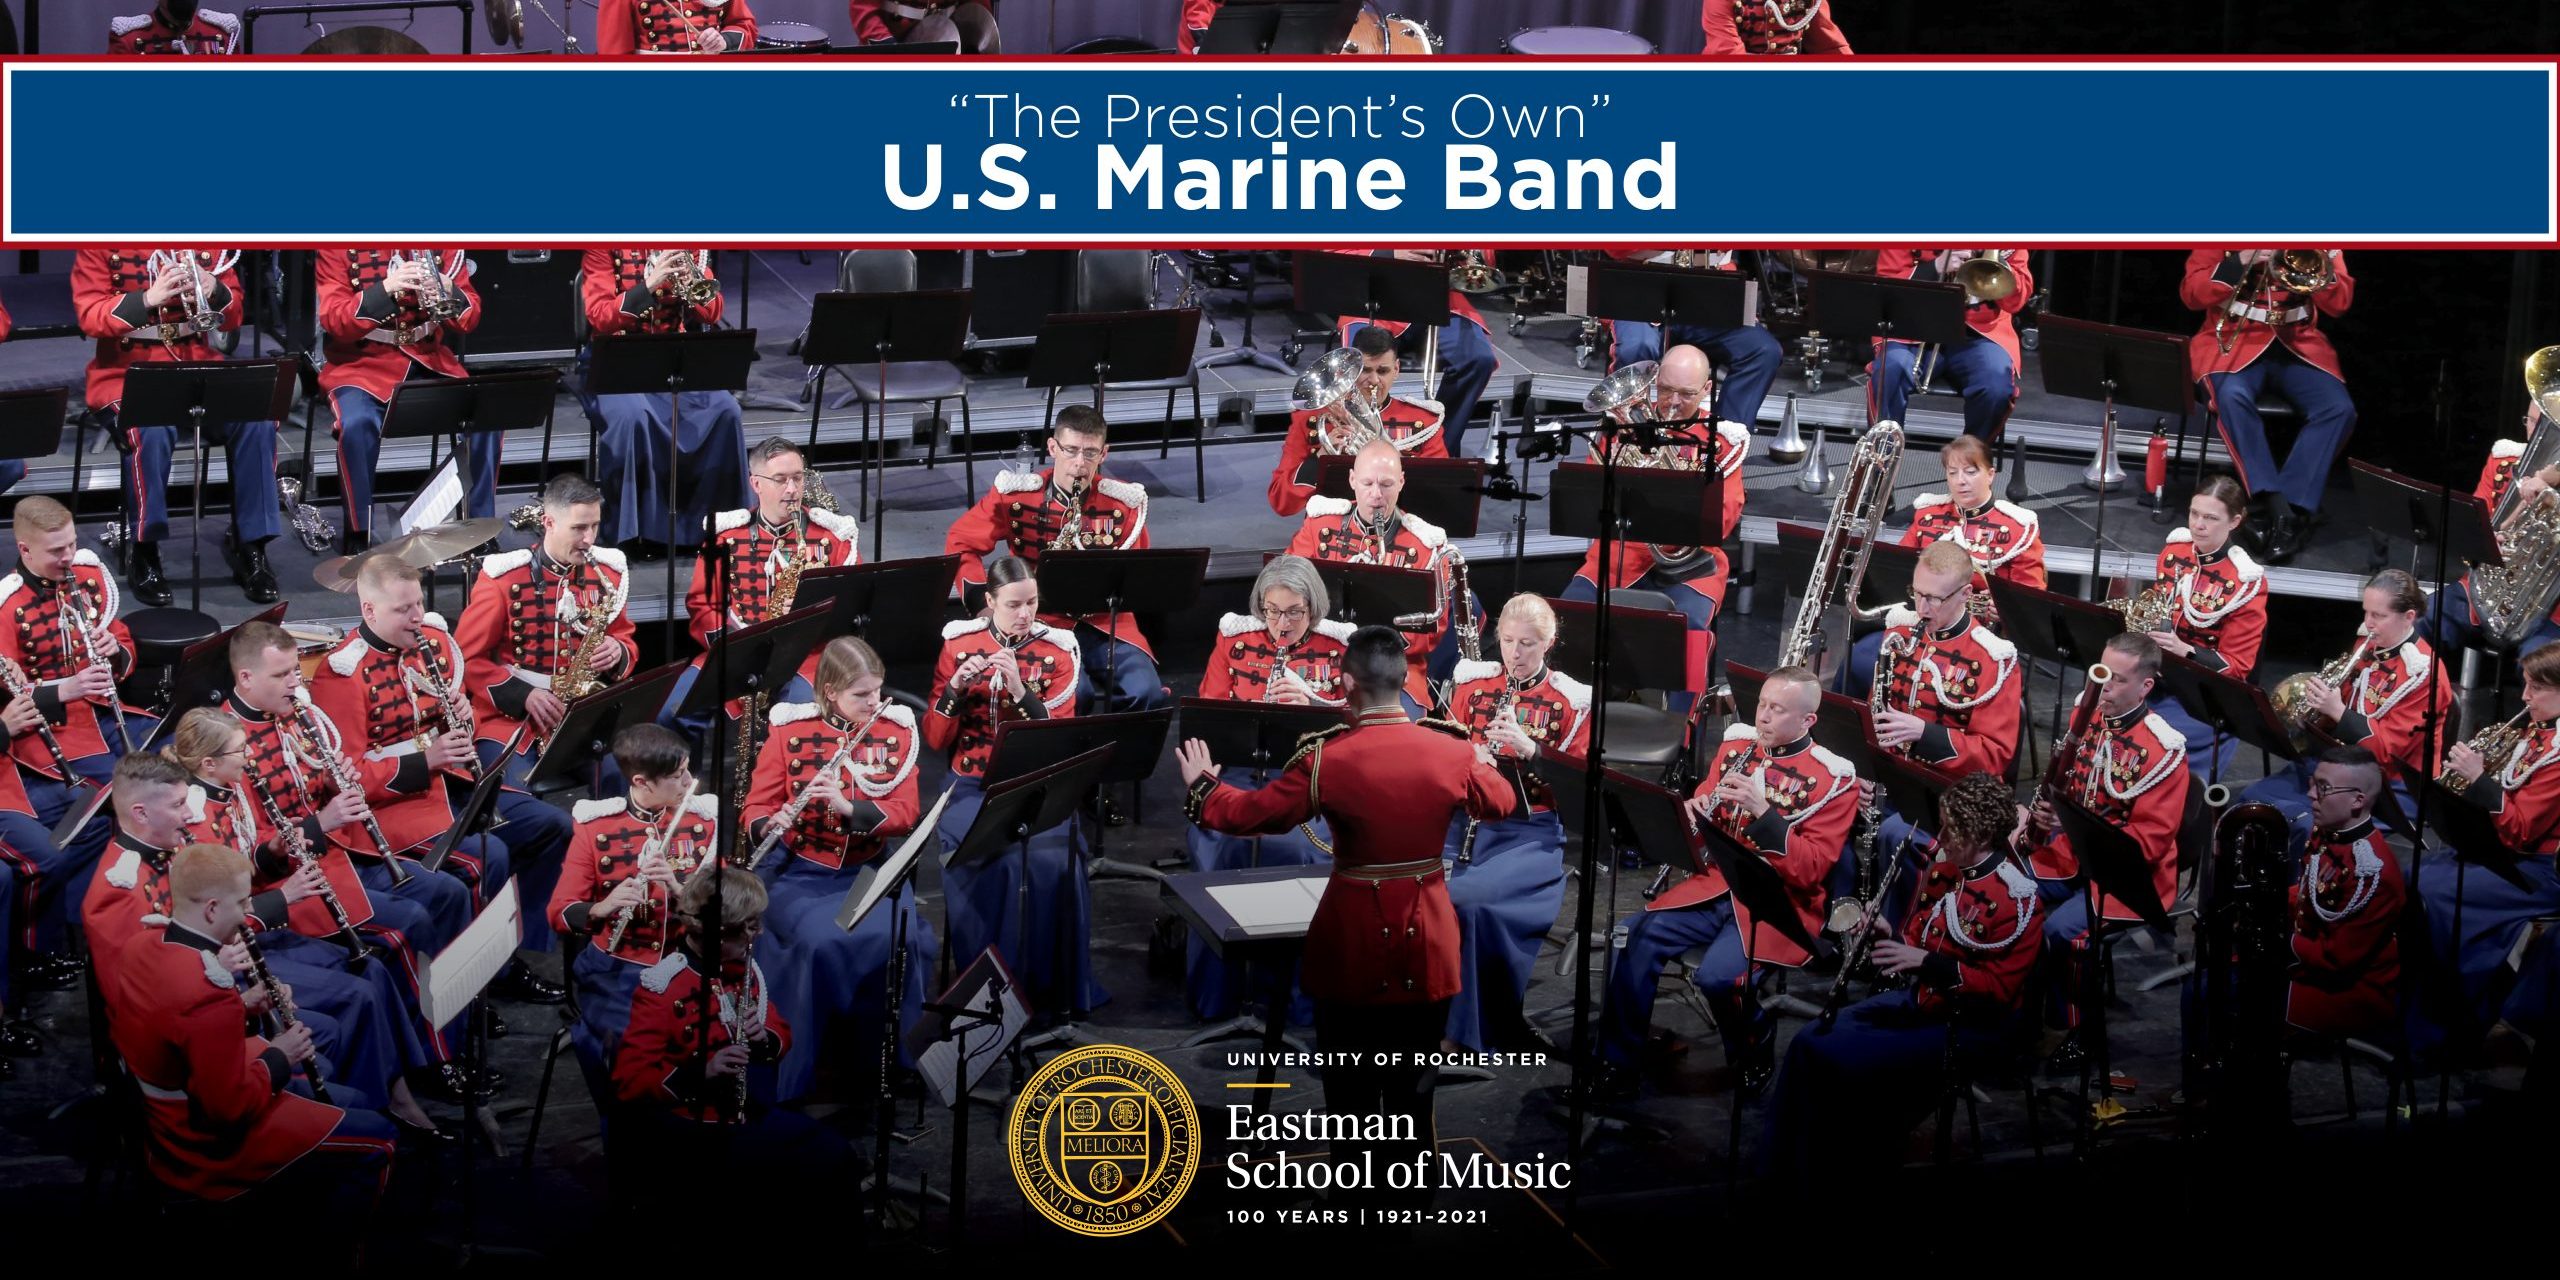 “The President’s Own” U.S. Marine Band to Perform at Eastman Eastman